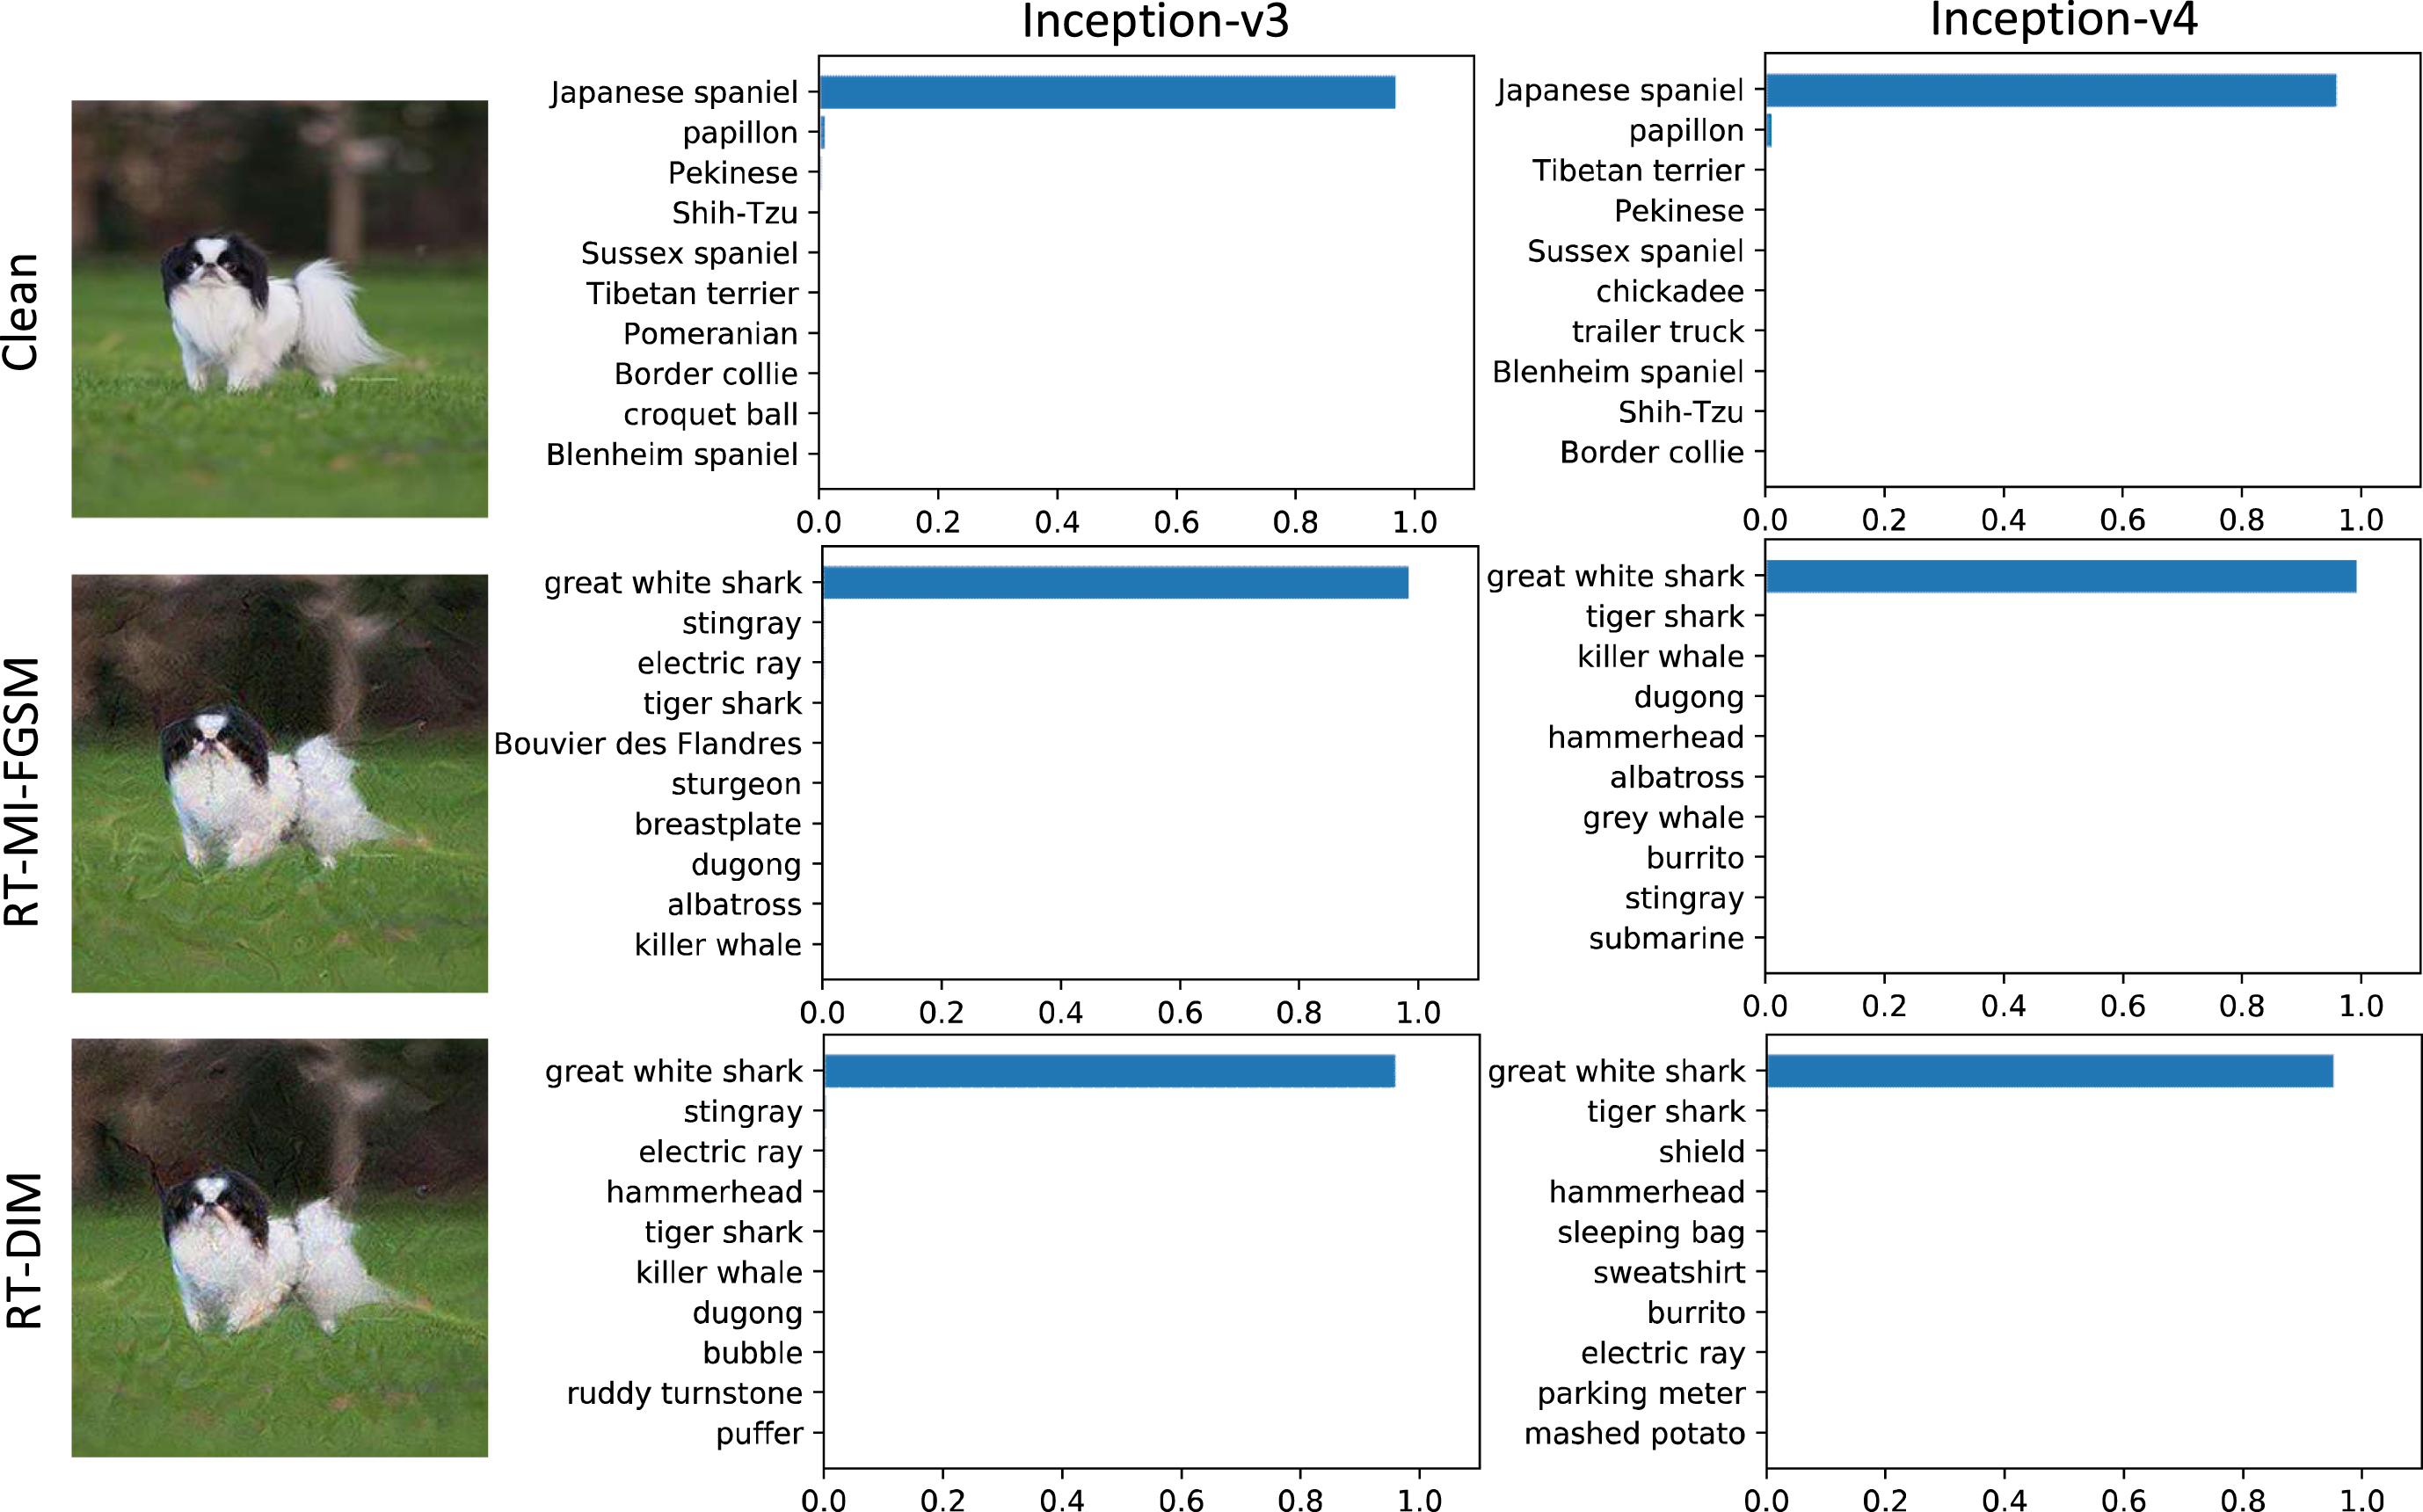 The classification of a clean image and corresponding adversarial examples on Inception v3 and Inception v4 model are shown. For the images, the ground-truth is Japanese spaniel. The first row shows the top-10 confidence distributions for the clean image, which indicates all the models provide right prediction with high confidences. The second and third rows show the top-10 confidence distributions of the adversarial examples generated on the ensemble of models by RT-MI-FGSM and RT-DIM, which attack the two models successfully.